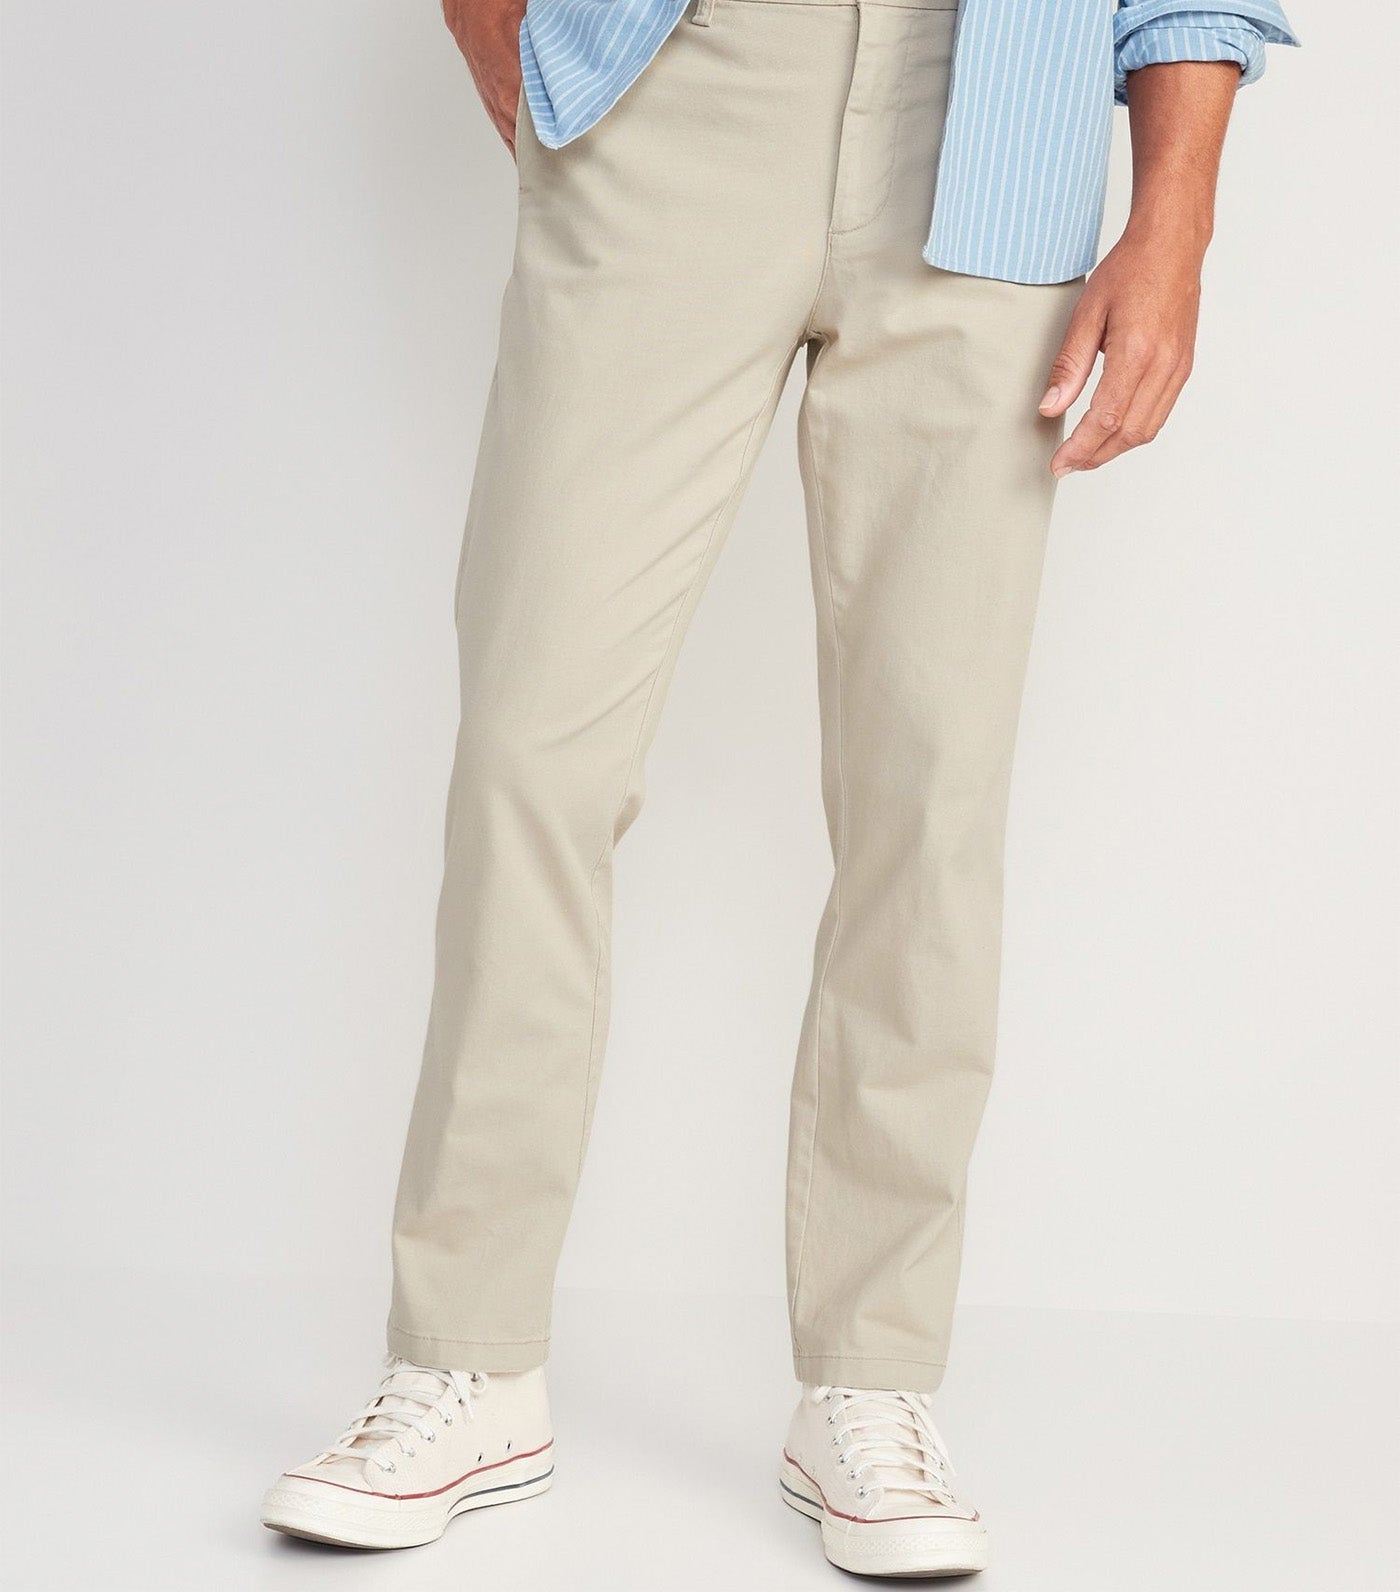 Straight Built-In Flex Rotation Chino Pants for Men A Stones Throw